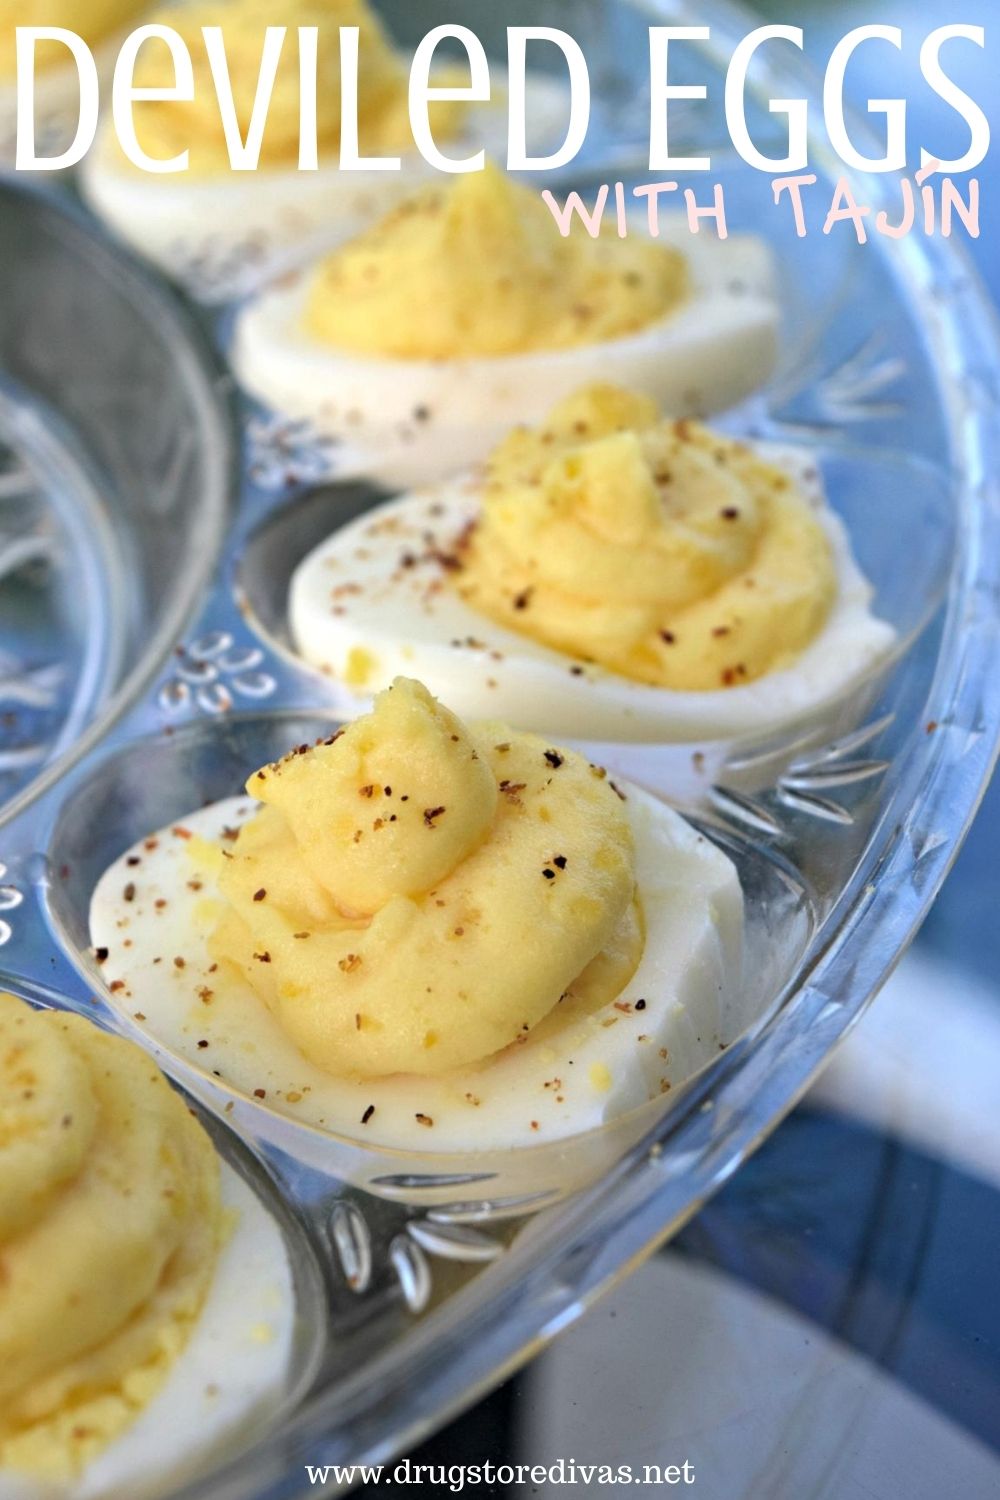 Deviled Eggs With Tajin are a (literally) sweet twist to traditional Deviled Eggs. Get the recipe at www.drugstoredivas.net.